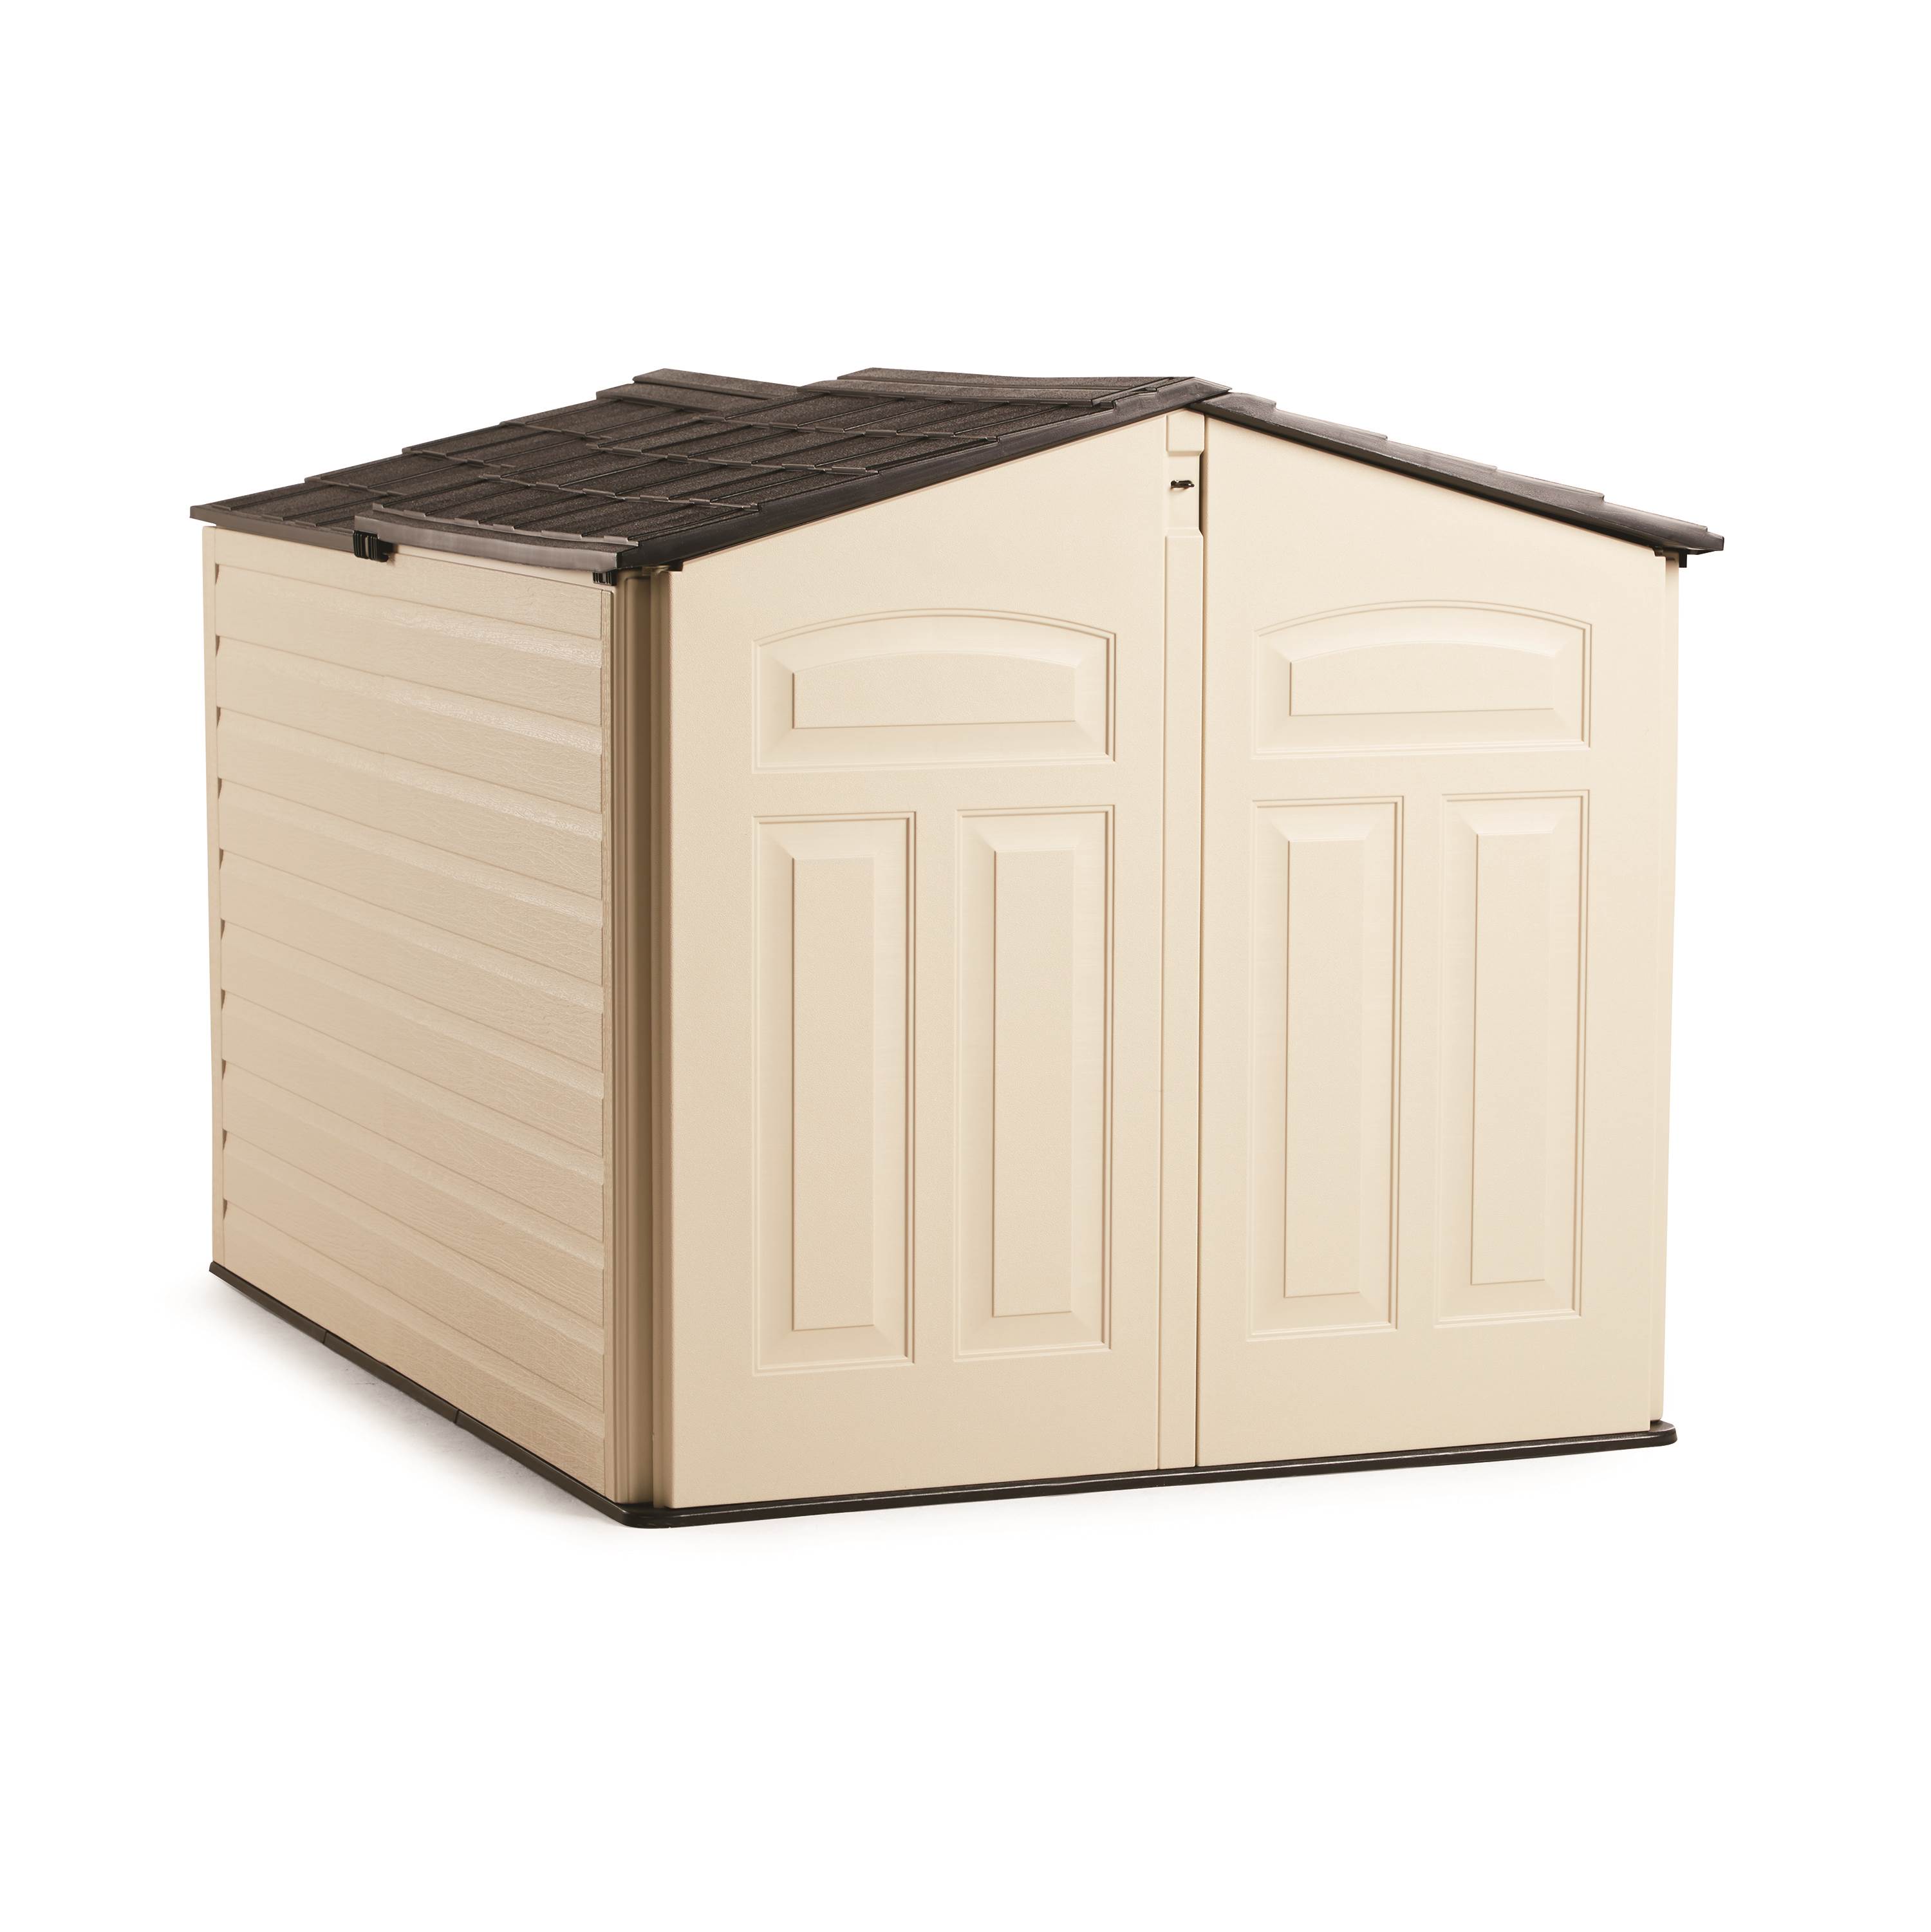 Rubbermaid 96 Cubic Feet Low-Profile Slide Lid Outdoor Storage Shed | 1800005 - image 1 of 9